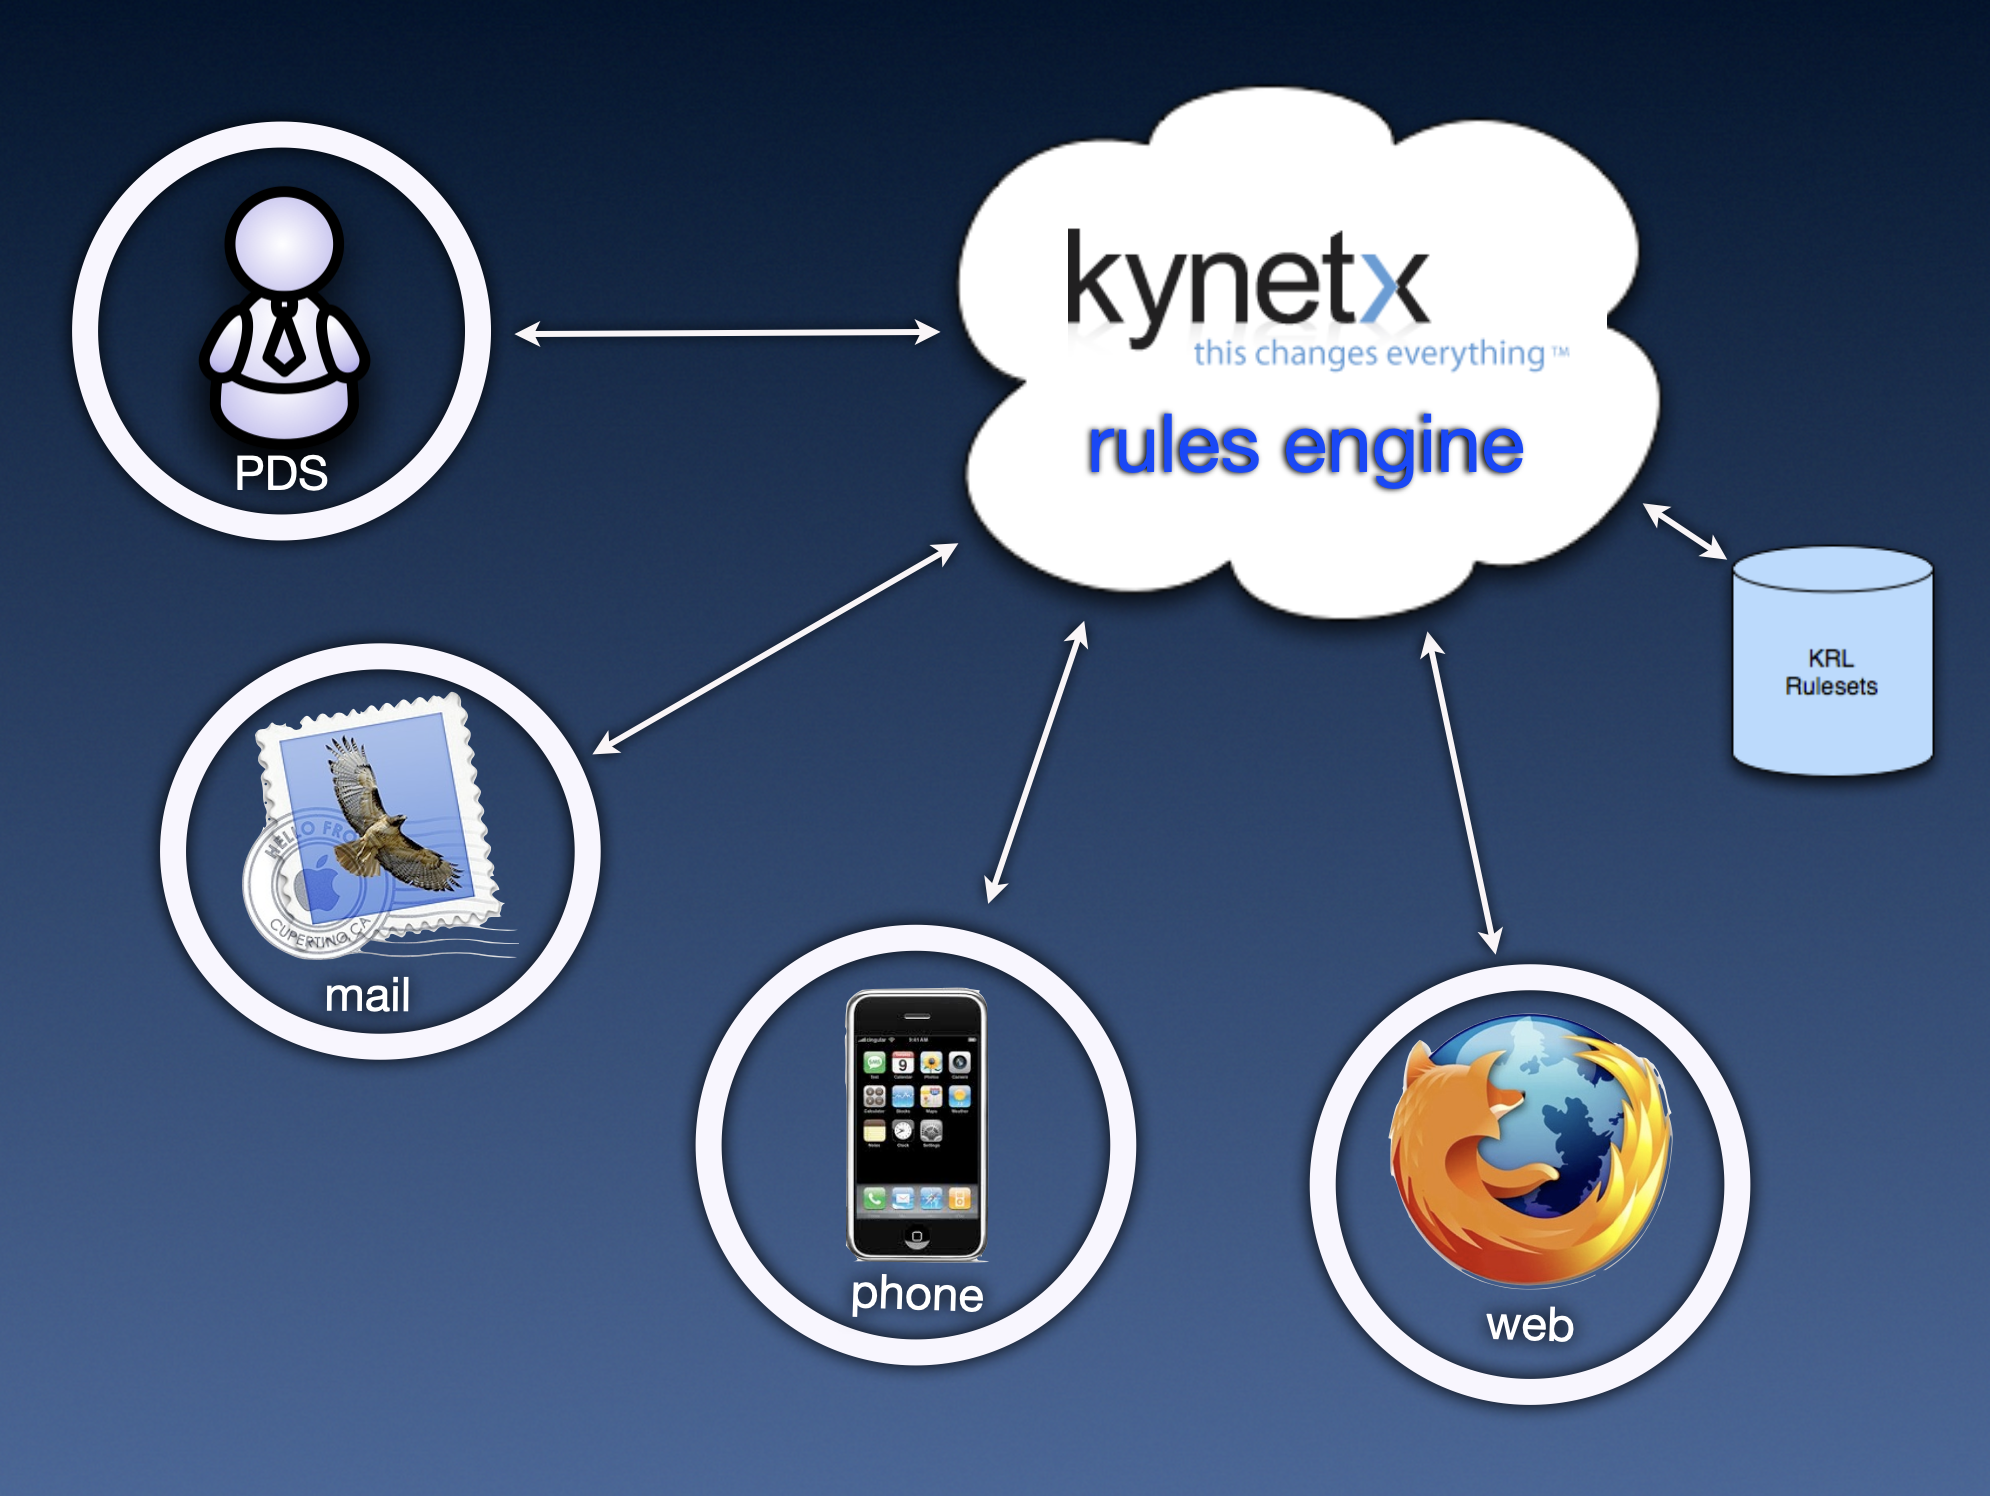 Endpoints raise events to the Kynetx Rules Engine